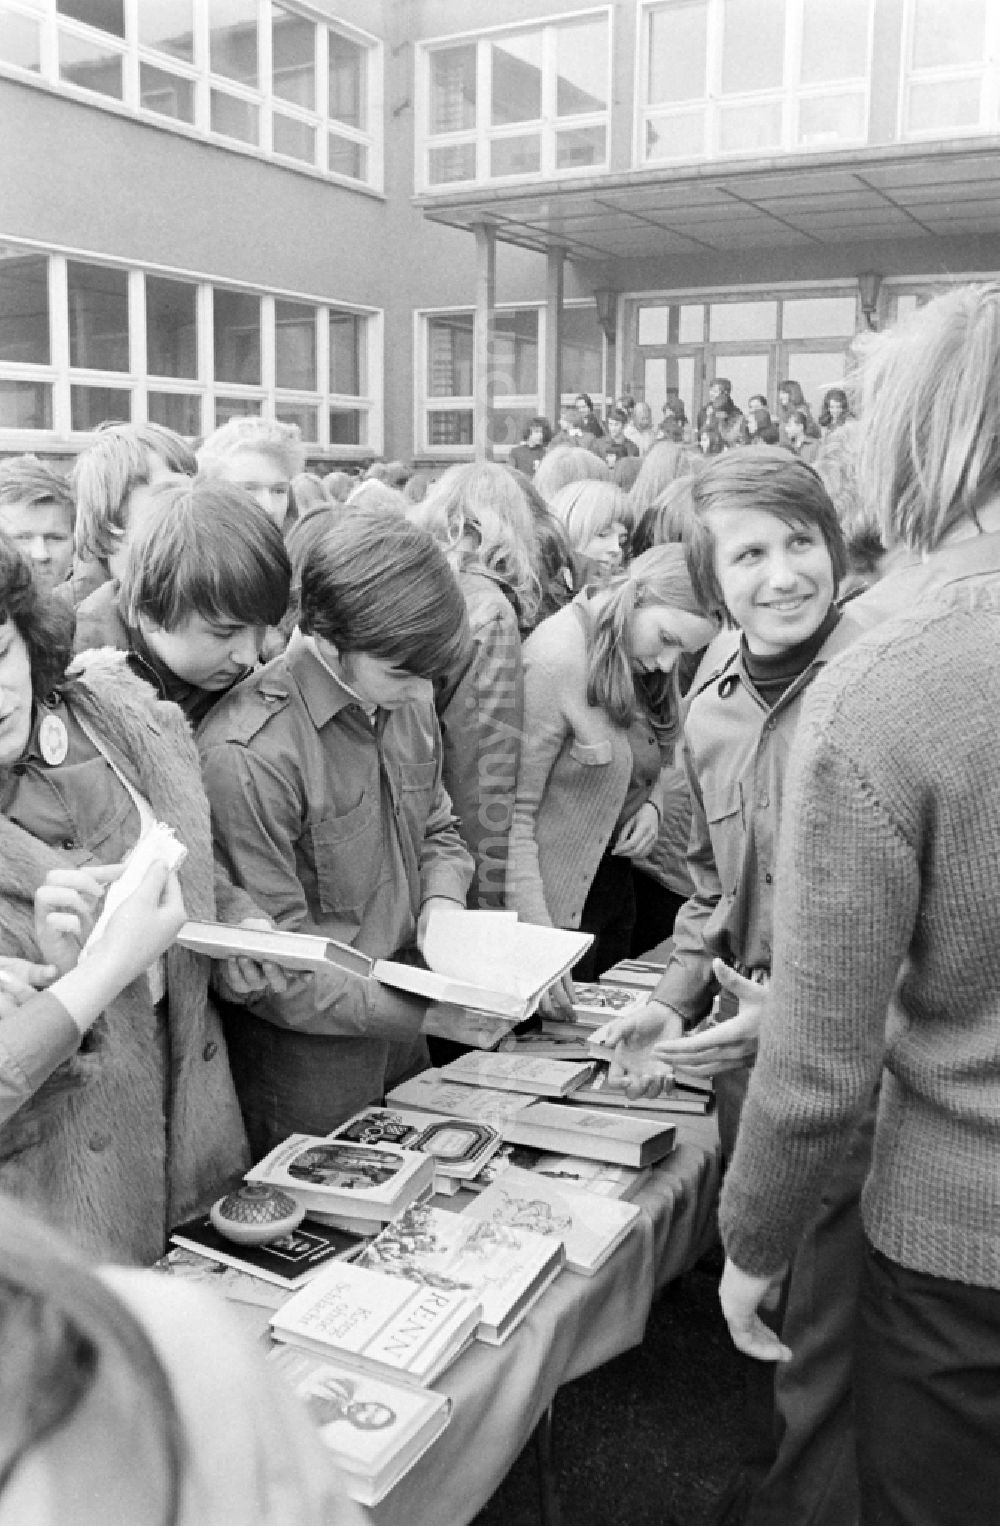 Spremberg: Auction and book bazaar on a schoolyard in Spremberg in the federal state of Brandenburg on the territory of the former GDR, German Democratic Republic